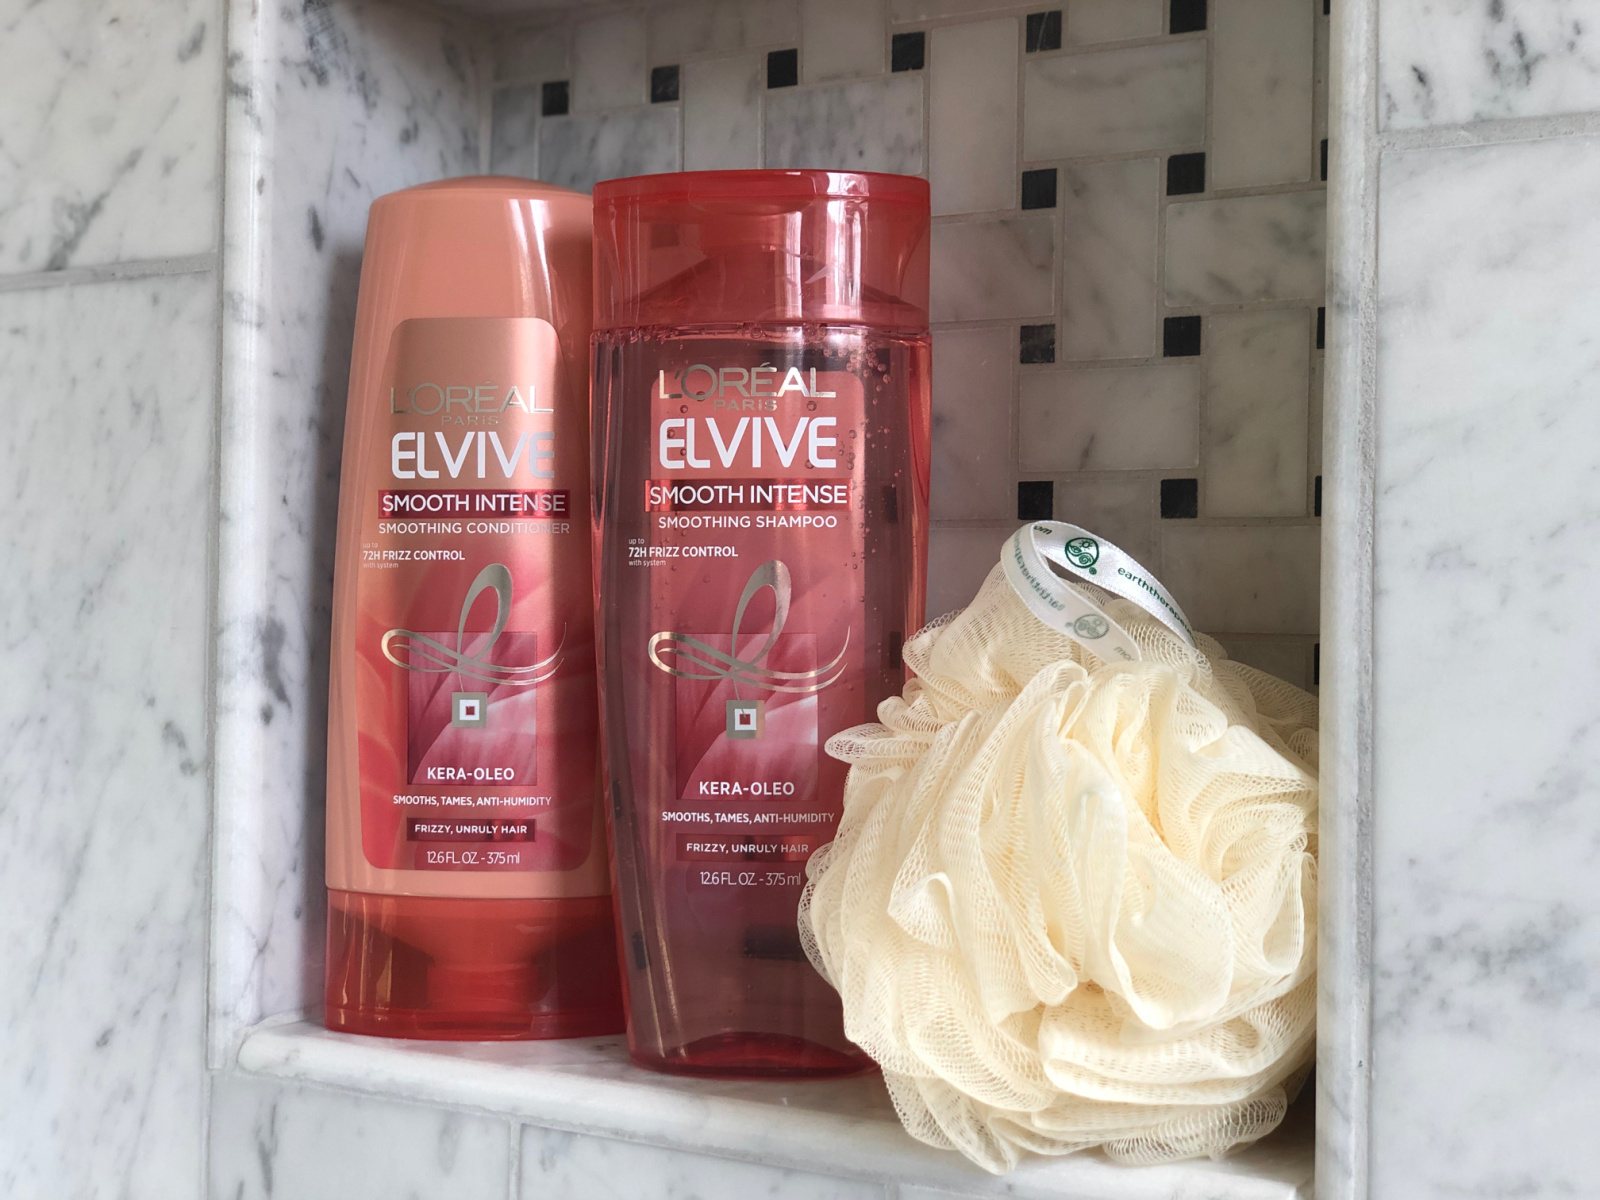 L’Oreal Elvive Haircare Just $1 Per Bottle At Kroger